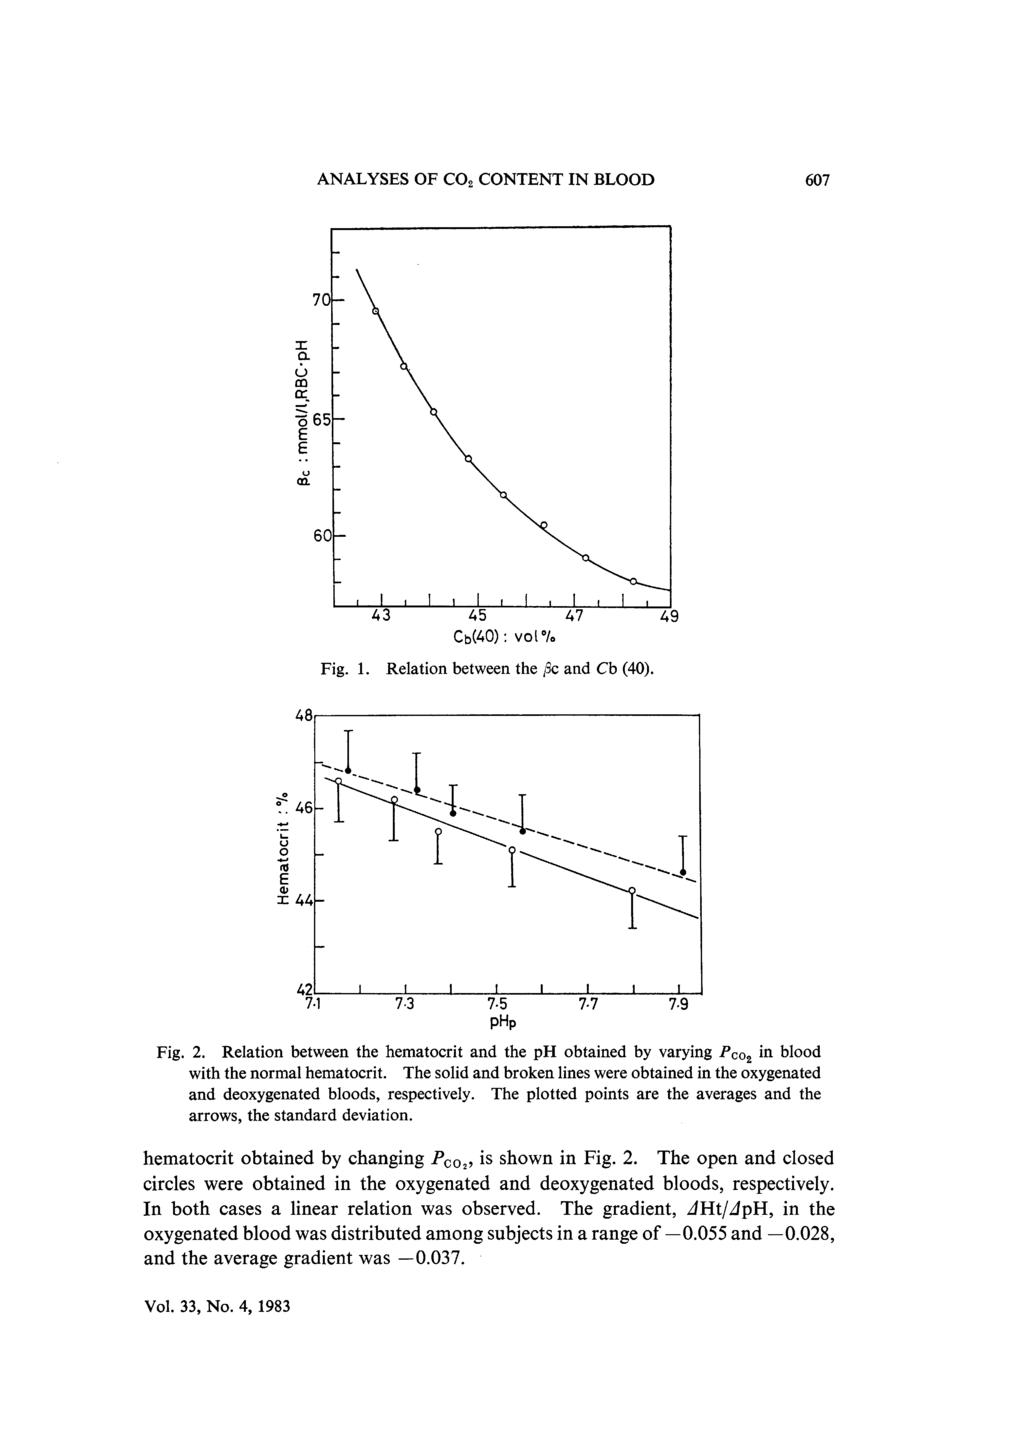 ANALYSES OF CO2 CONTENT IN BLOOD 607 Fig. 1. Relation between the jlc and Cb (40). Fig. 2. Relation between the hematocrit and the ph obtained by varying PC02 in blood with the normal hematocrit.